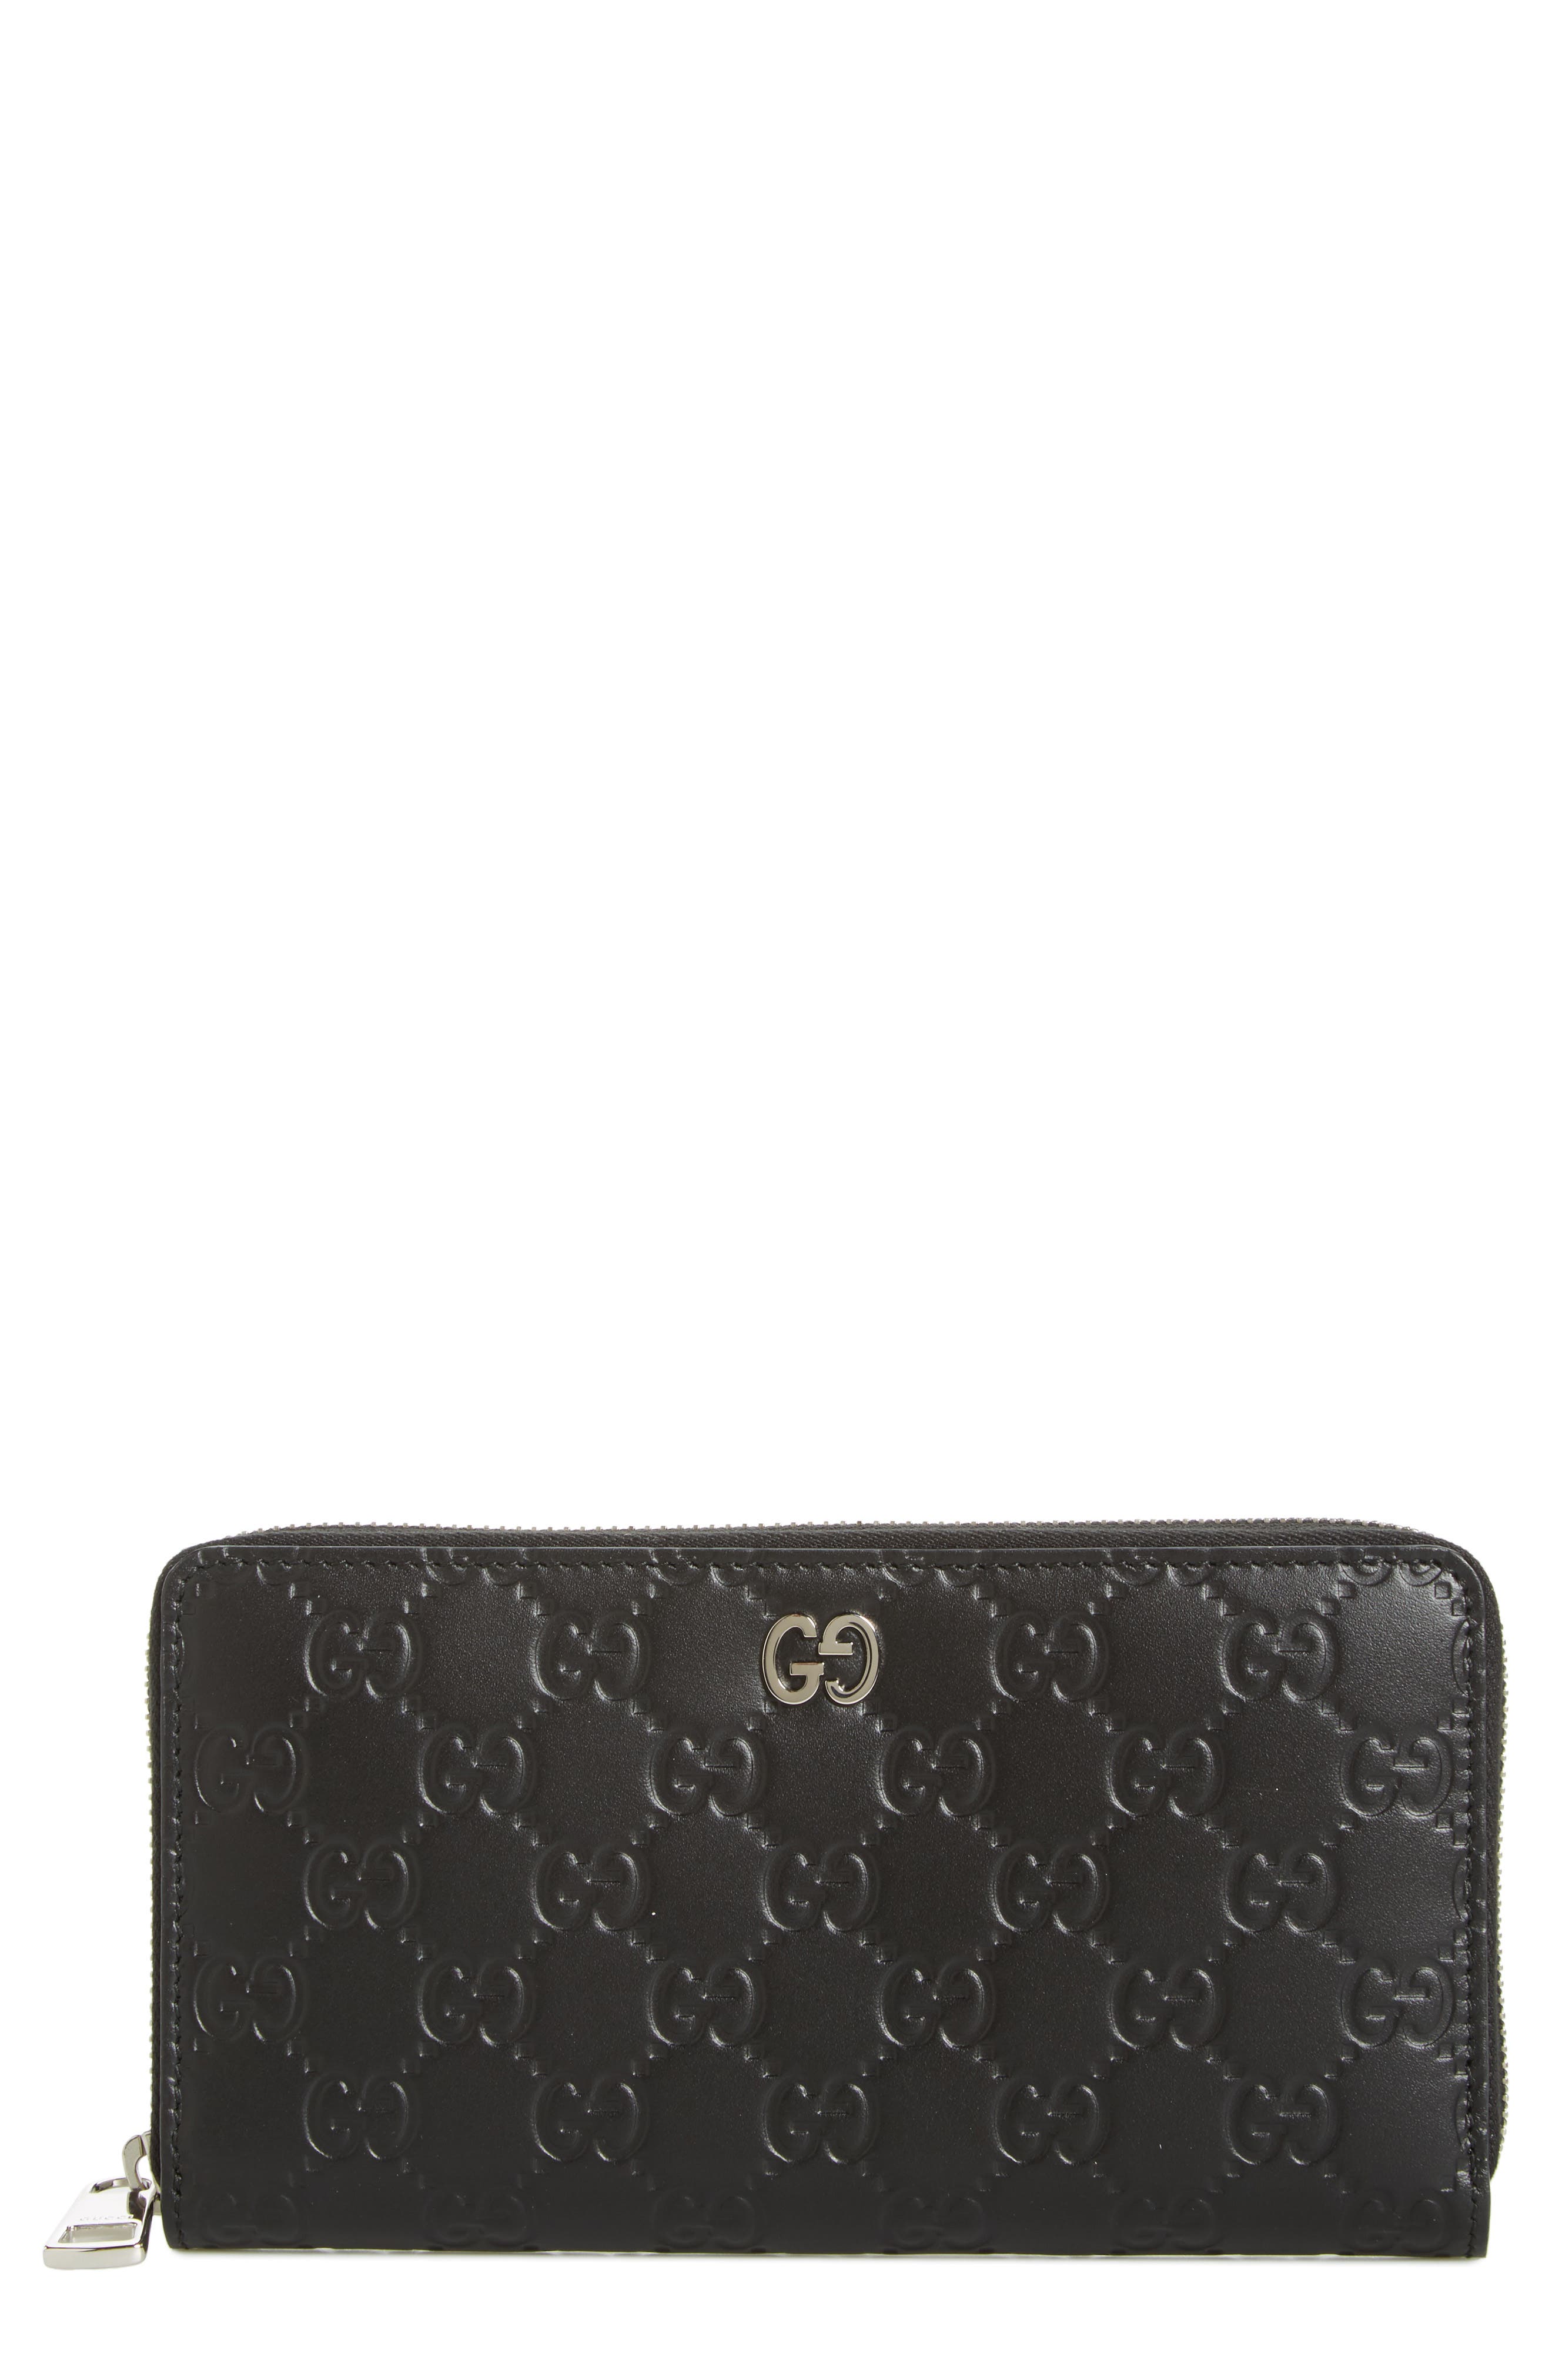 Gucci Dorian Leather Wallet | Nordstrom